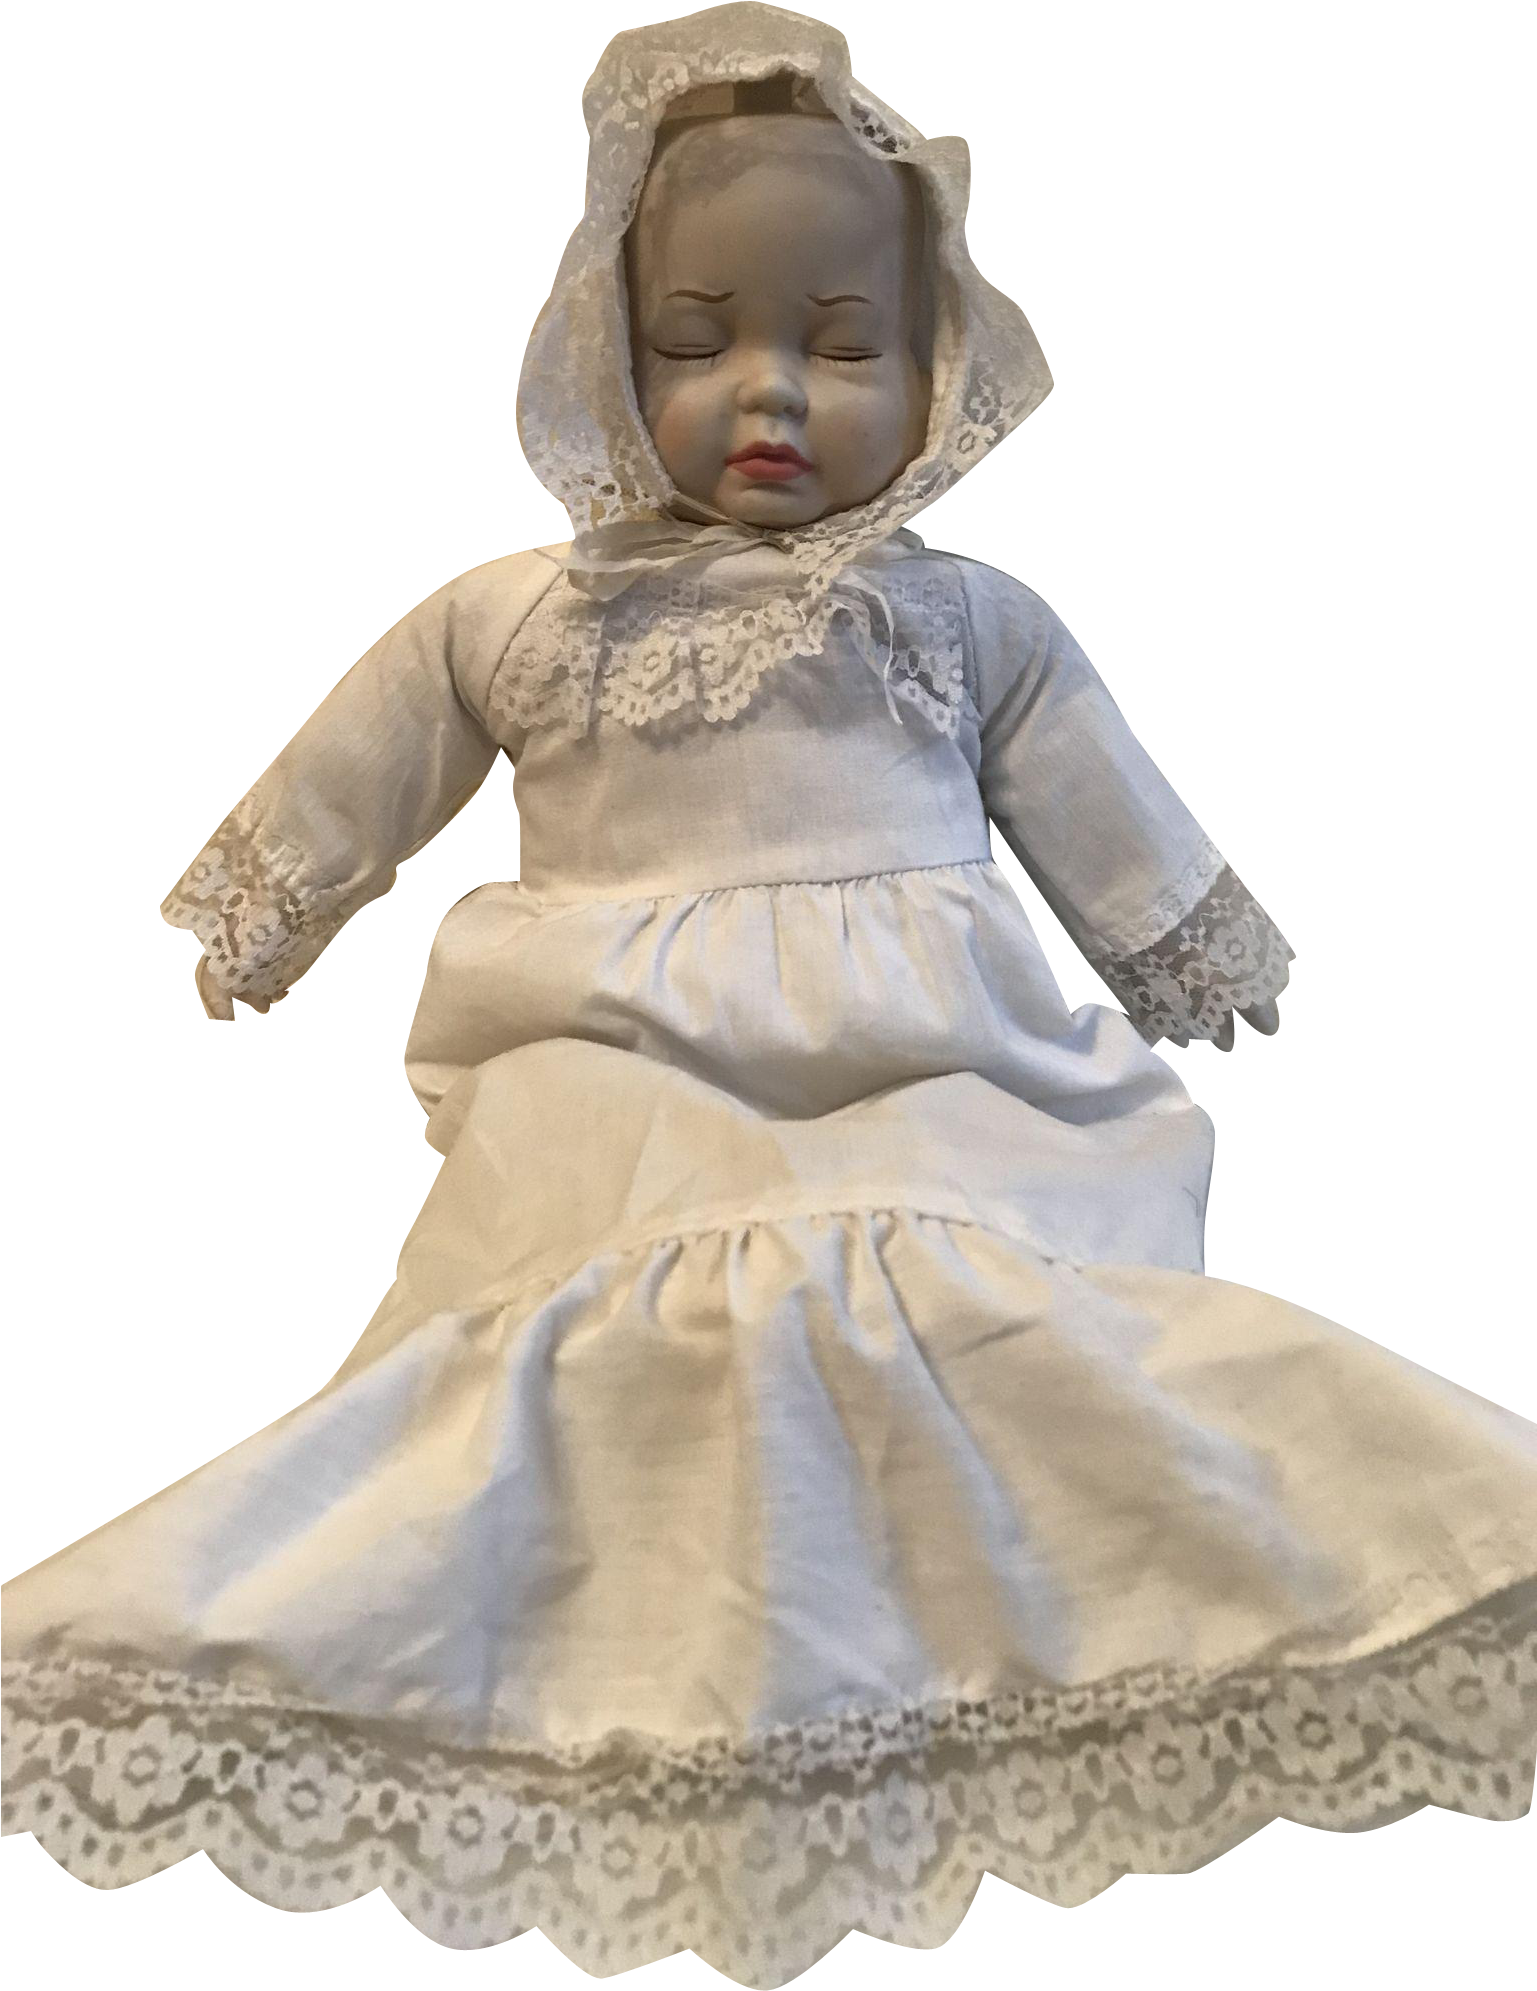 A Doll In A White Dress